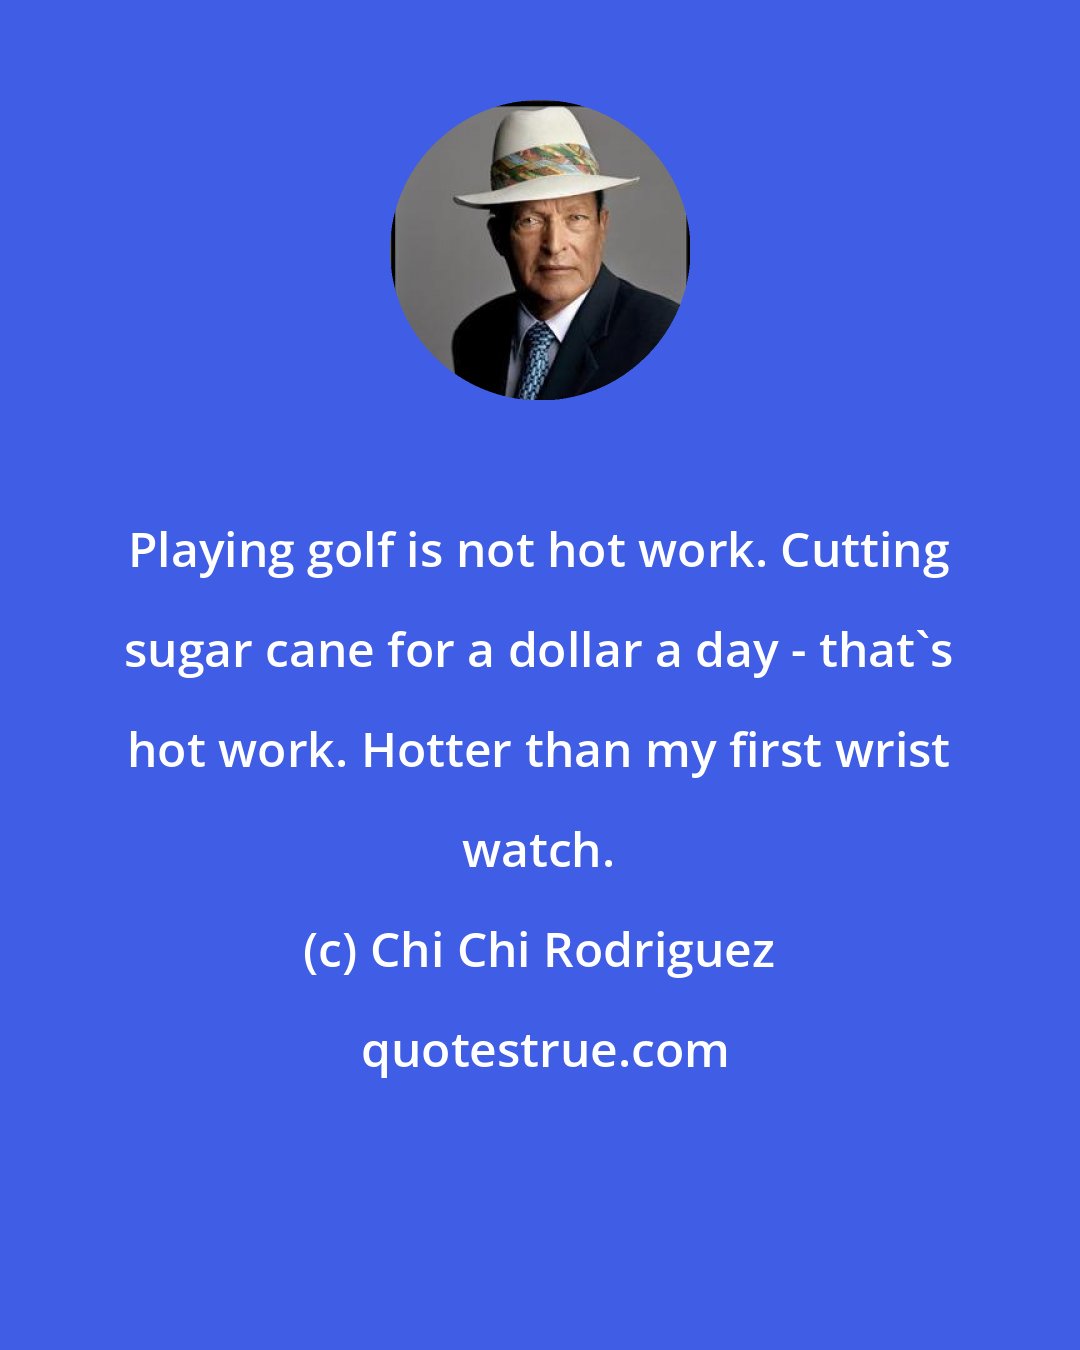 Chi Chi Rodriguez: Playing golf is not hot work. Cutting sugar cane for a dollar a day - that's hot work. Hotter than my first wrist watch.